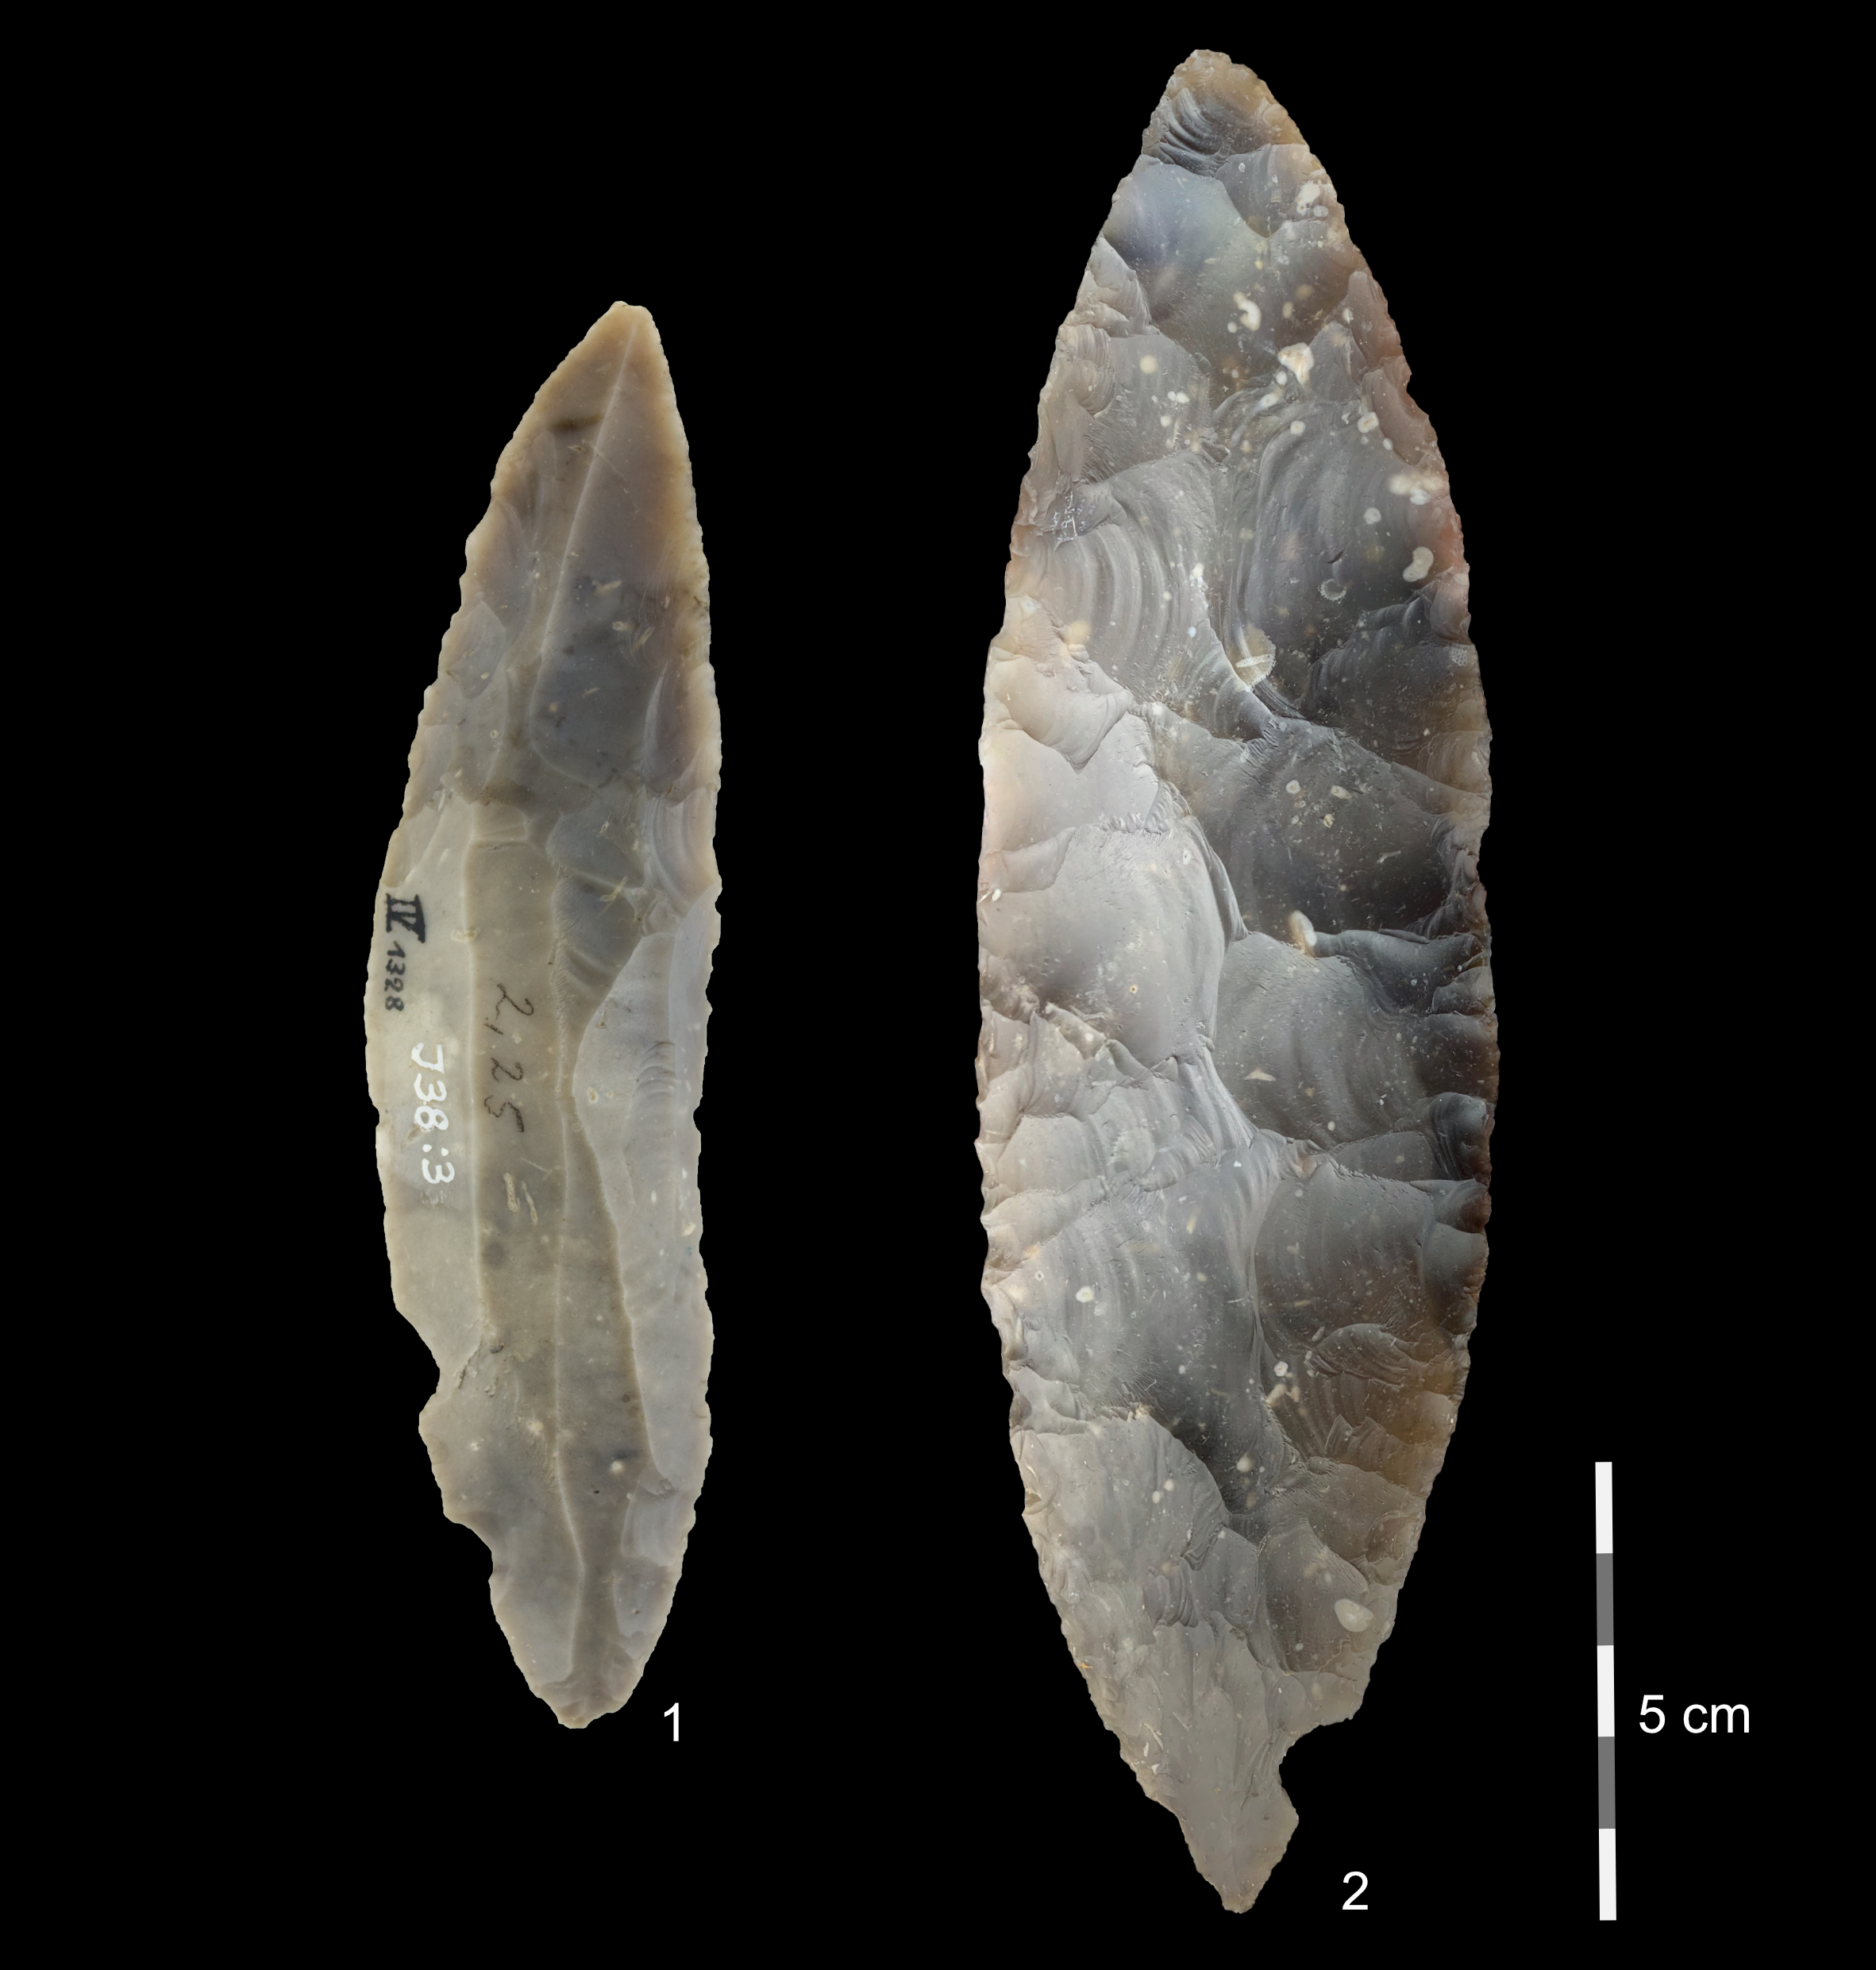 Leaf-shaped stone blades uncovered at the Ranis cave site